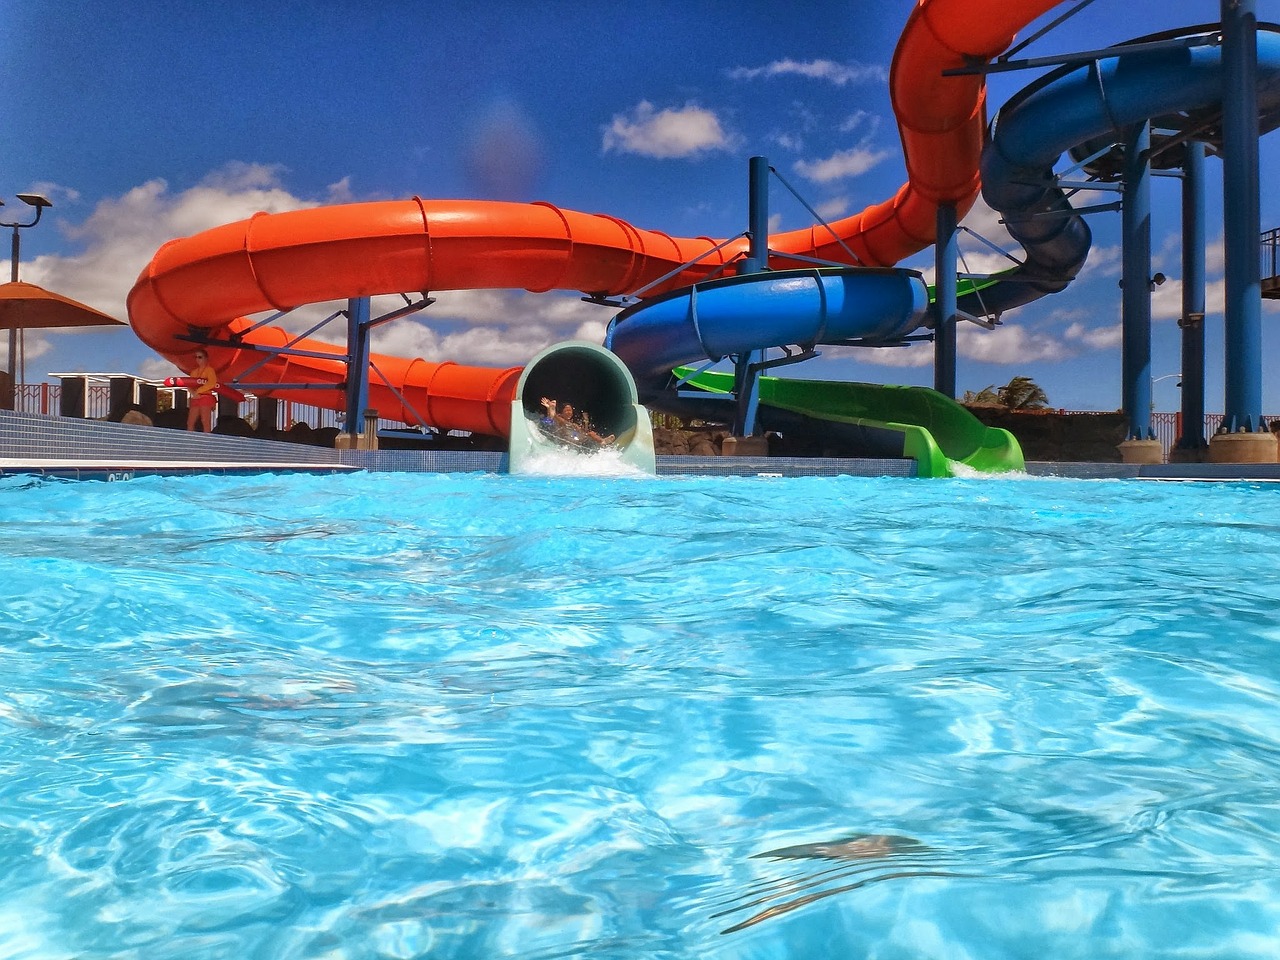 ​Choosing The Best Water Park In Gran Canaria – What Options Do I Have?